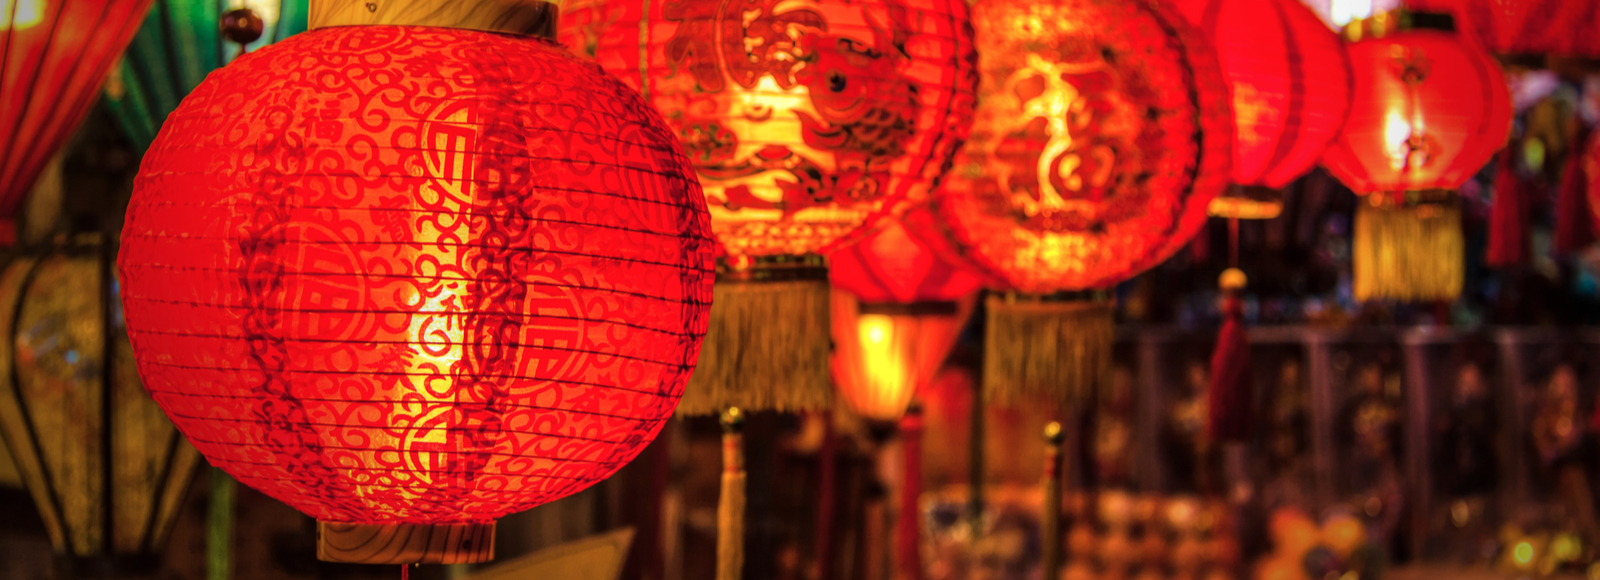 Creating an asian theme in your restaurant